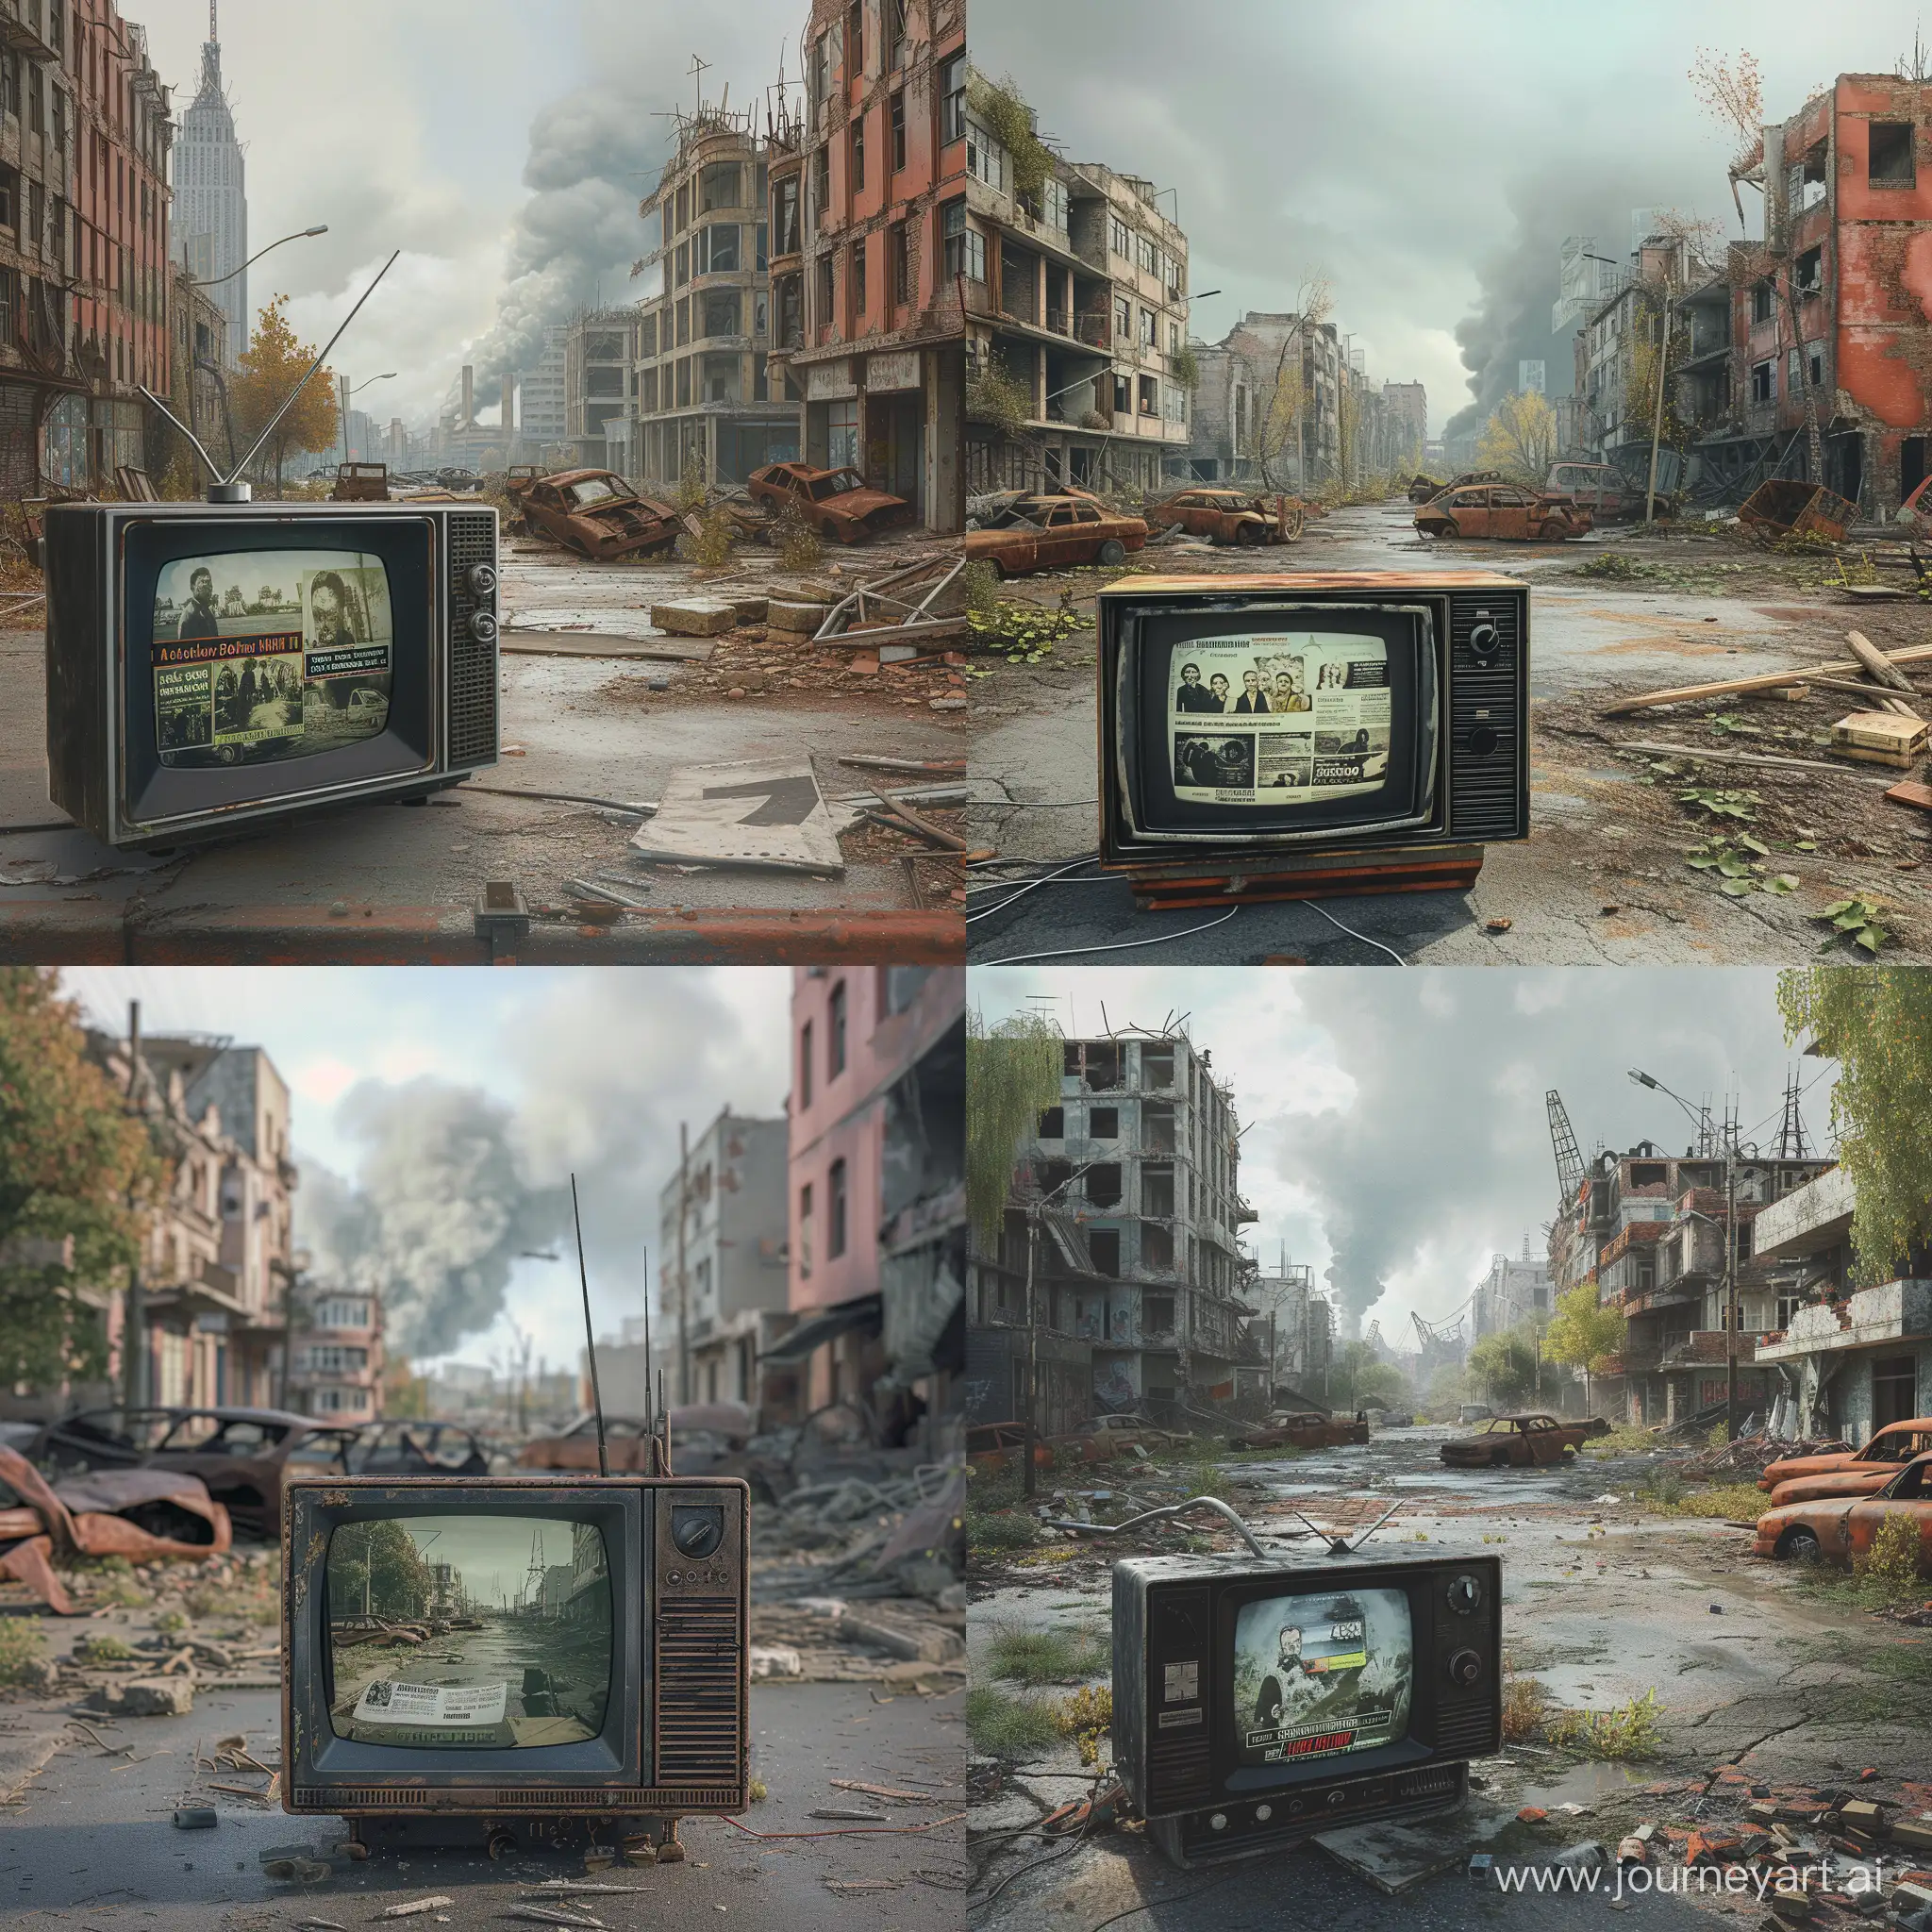 An image of a working television on a deserted street in an abandoned city. The TV is showing a news show about a nuclear catastrophe that has devastated the world. Destroyed buildings and rusted cars can be seen in the background. The sky is gray and full of clouds of smoke.